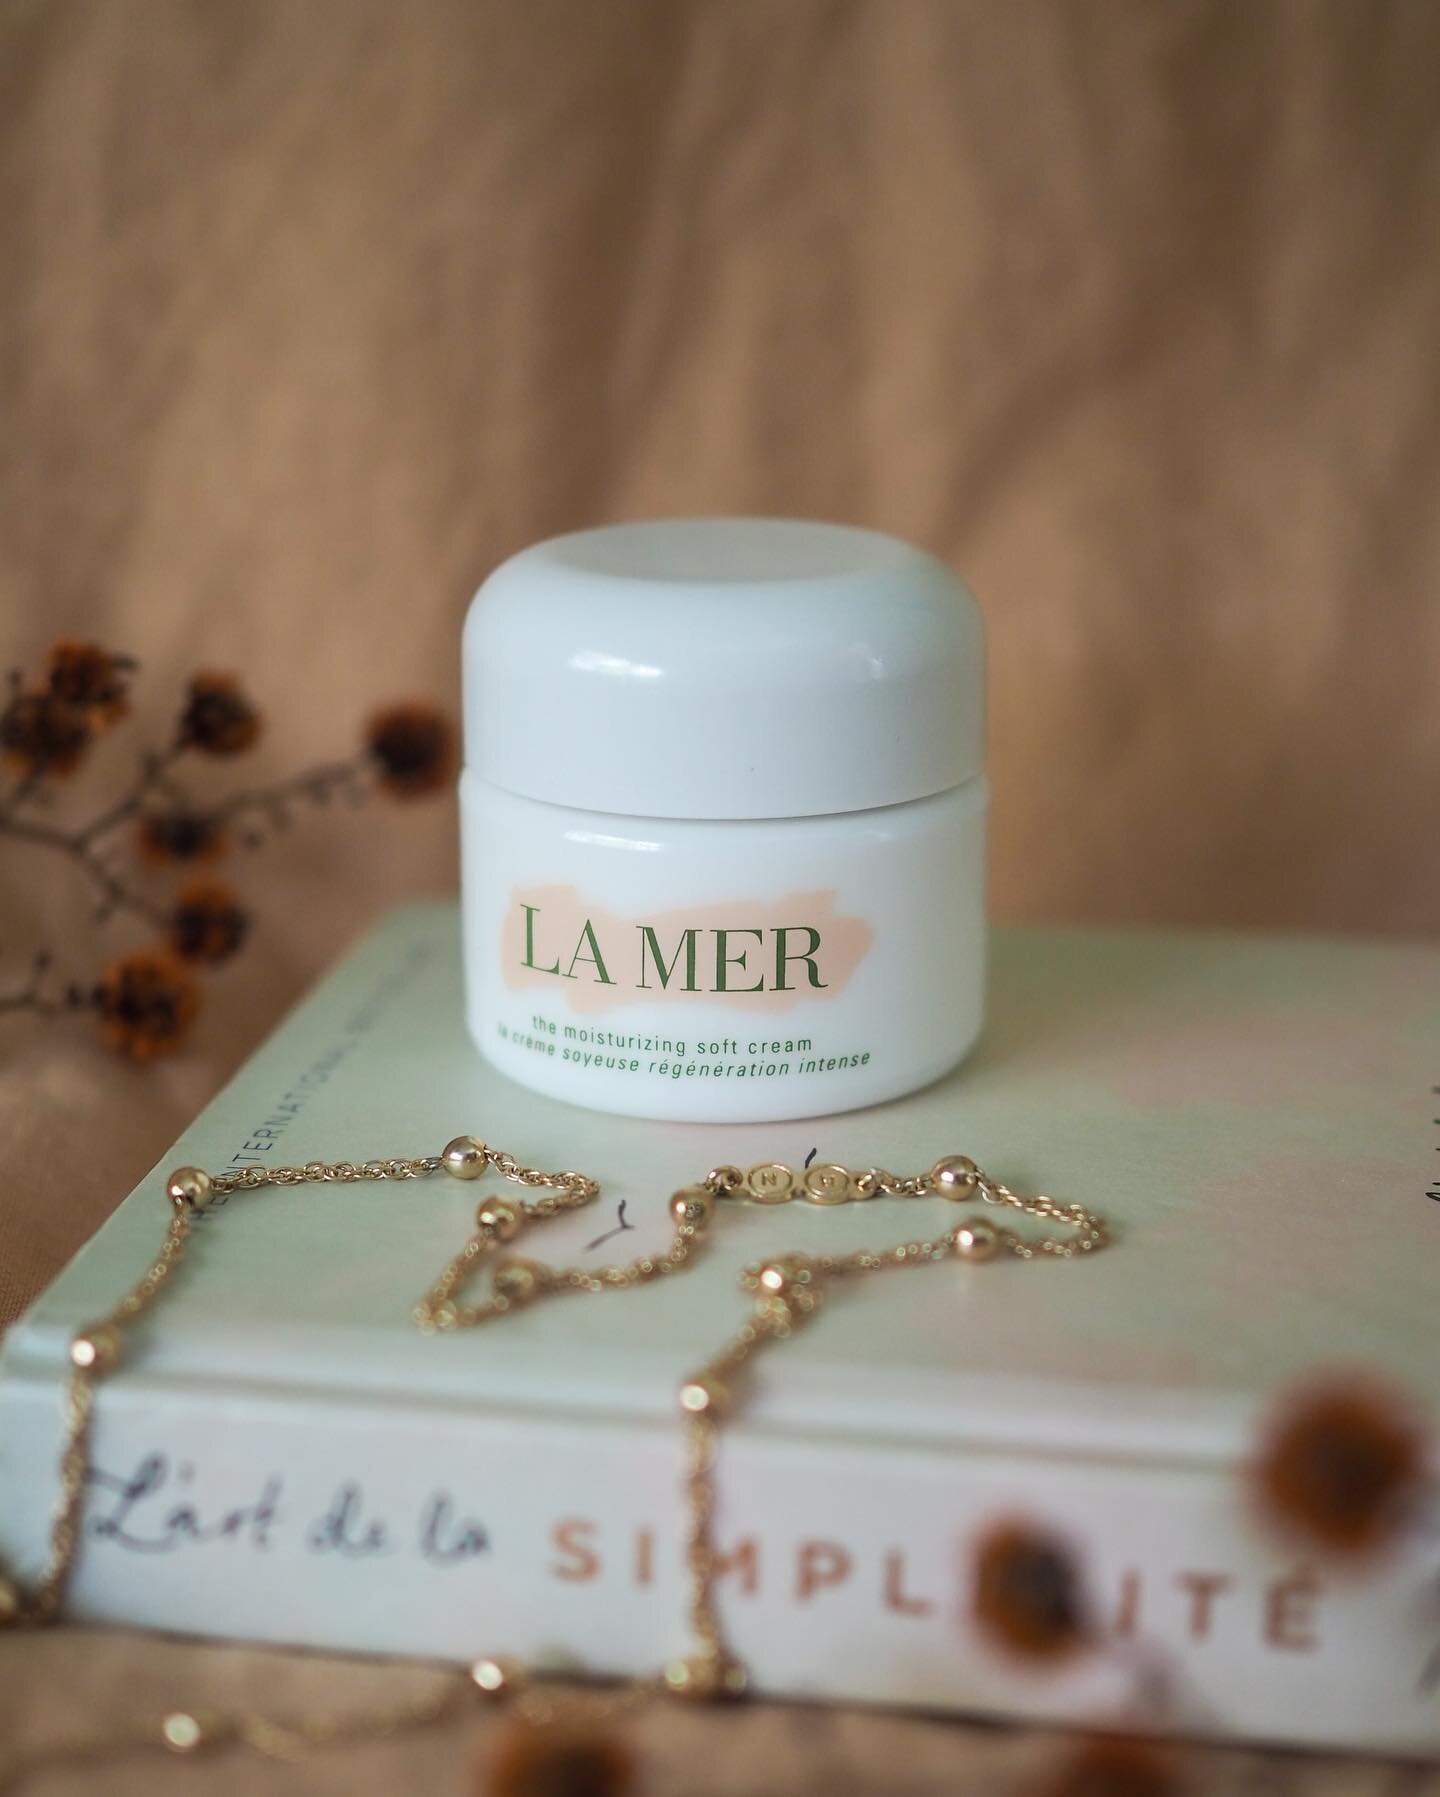 The small things that make my day a little better ✨@lamer

#TheMoisturizingSoftCream is the Holy Grail of moisturisers 🙌 It&rsquo;s without a doubt the most luxurious product I&rsquo;ve ever used, it feels like magic on my skin and smells like a fre